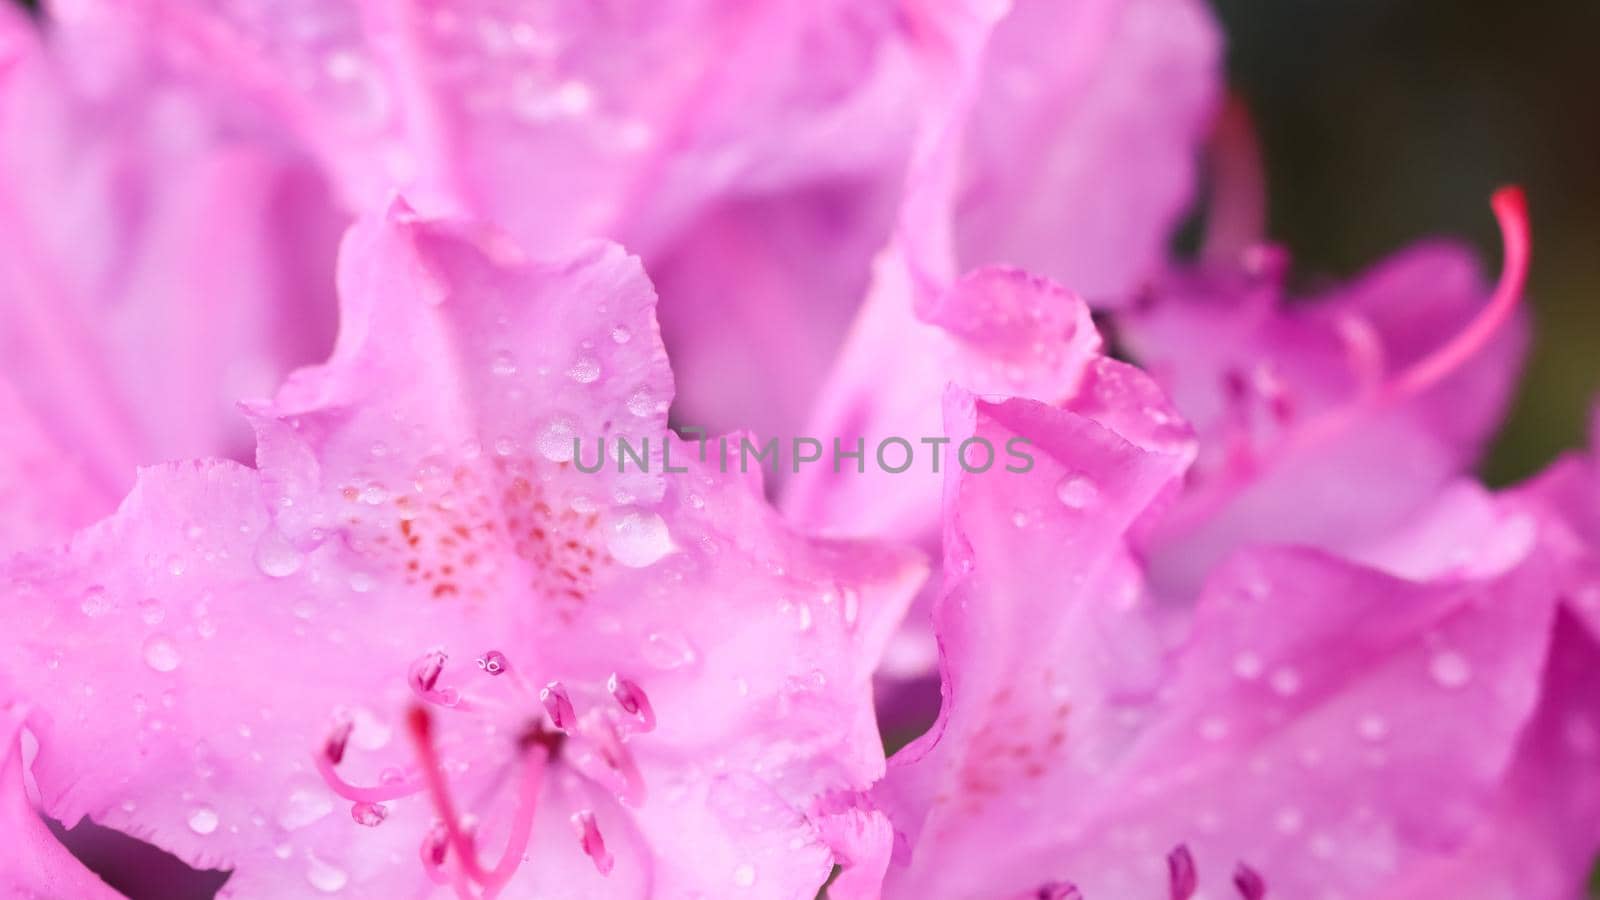 Soft focus, abstract floral background, pink Rhododendron flower petals with dew drops. Macro flowers backdrop for holiday brand design by Olayola